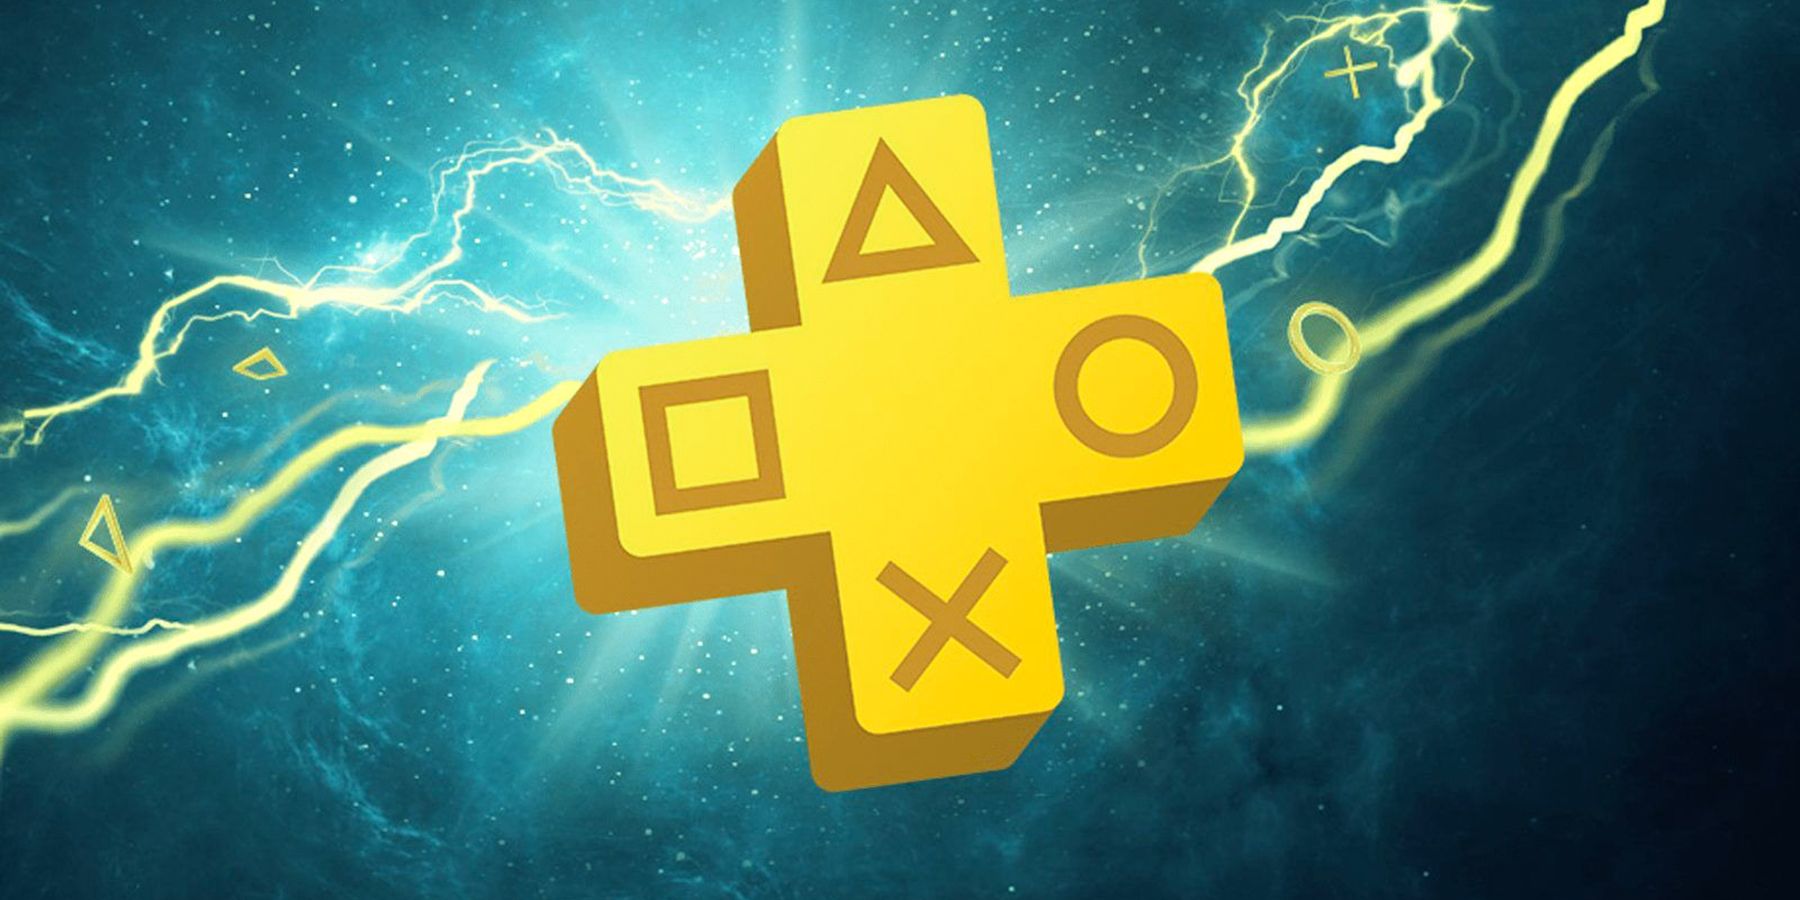 PS PLUS EXTRA All Games - PlayStation Plus Extra PS4 And PS5 Game Catalog - PS  PLUS AUGUST 2022 